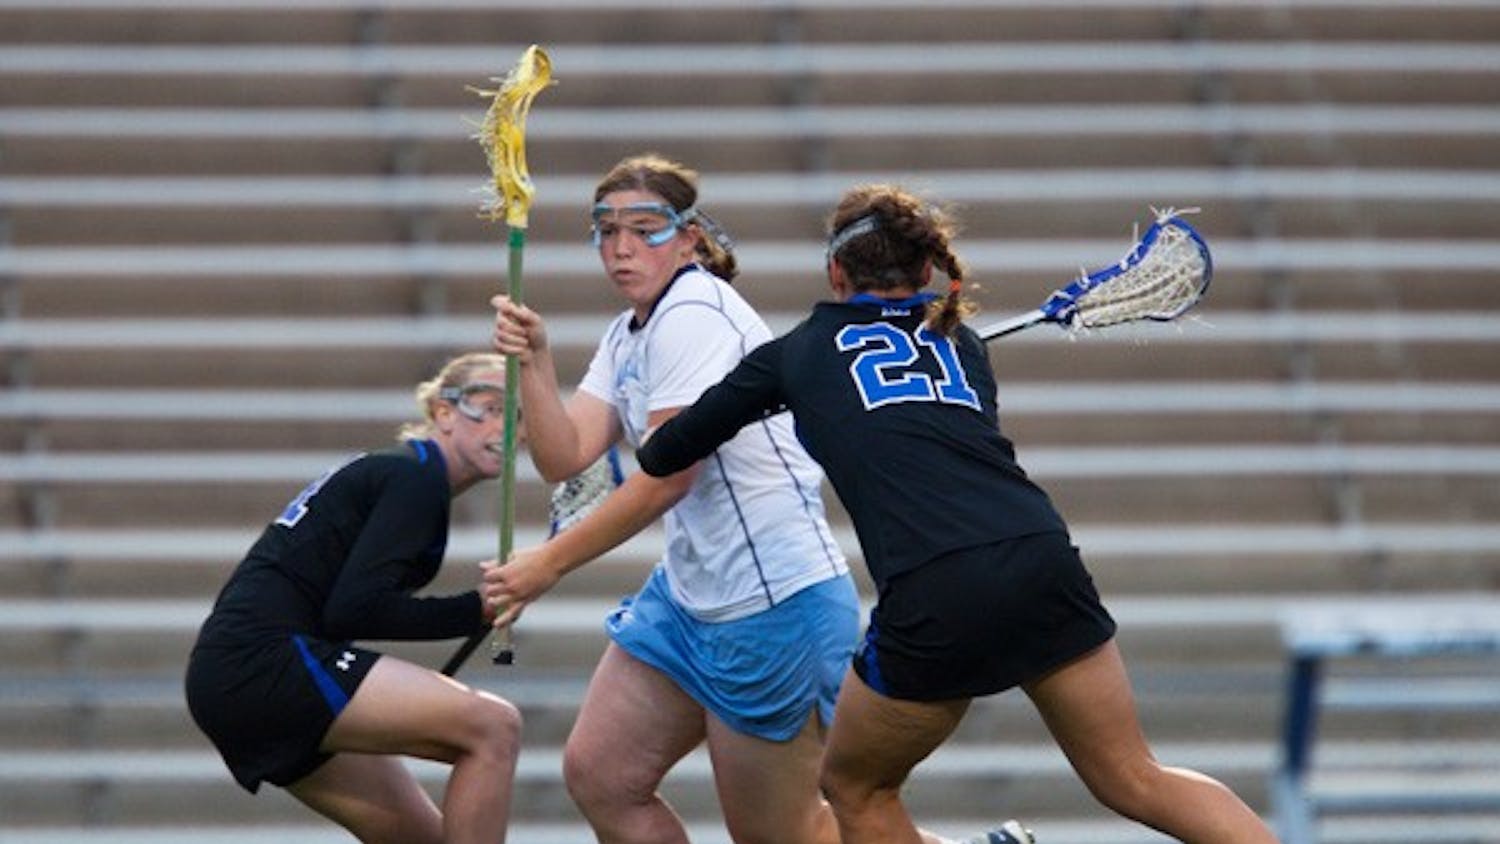 Junior Corey Donohoe works her way past two Duke defenders on her way to the goal Wednesday. DTH/Phong Dinh